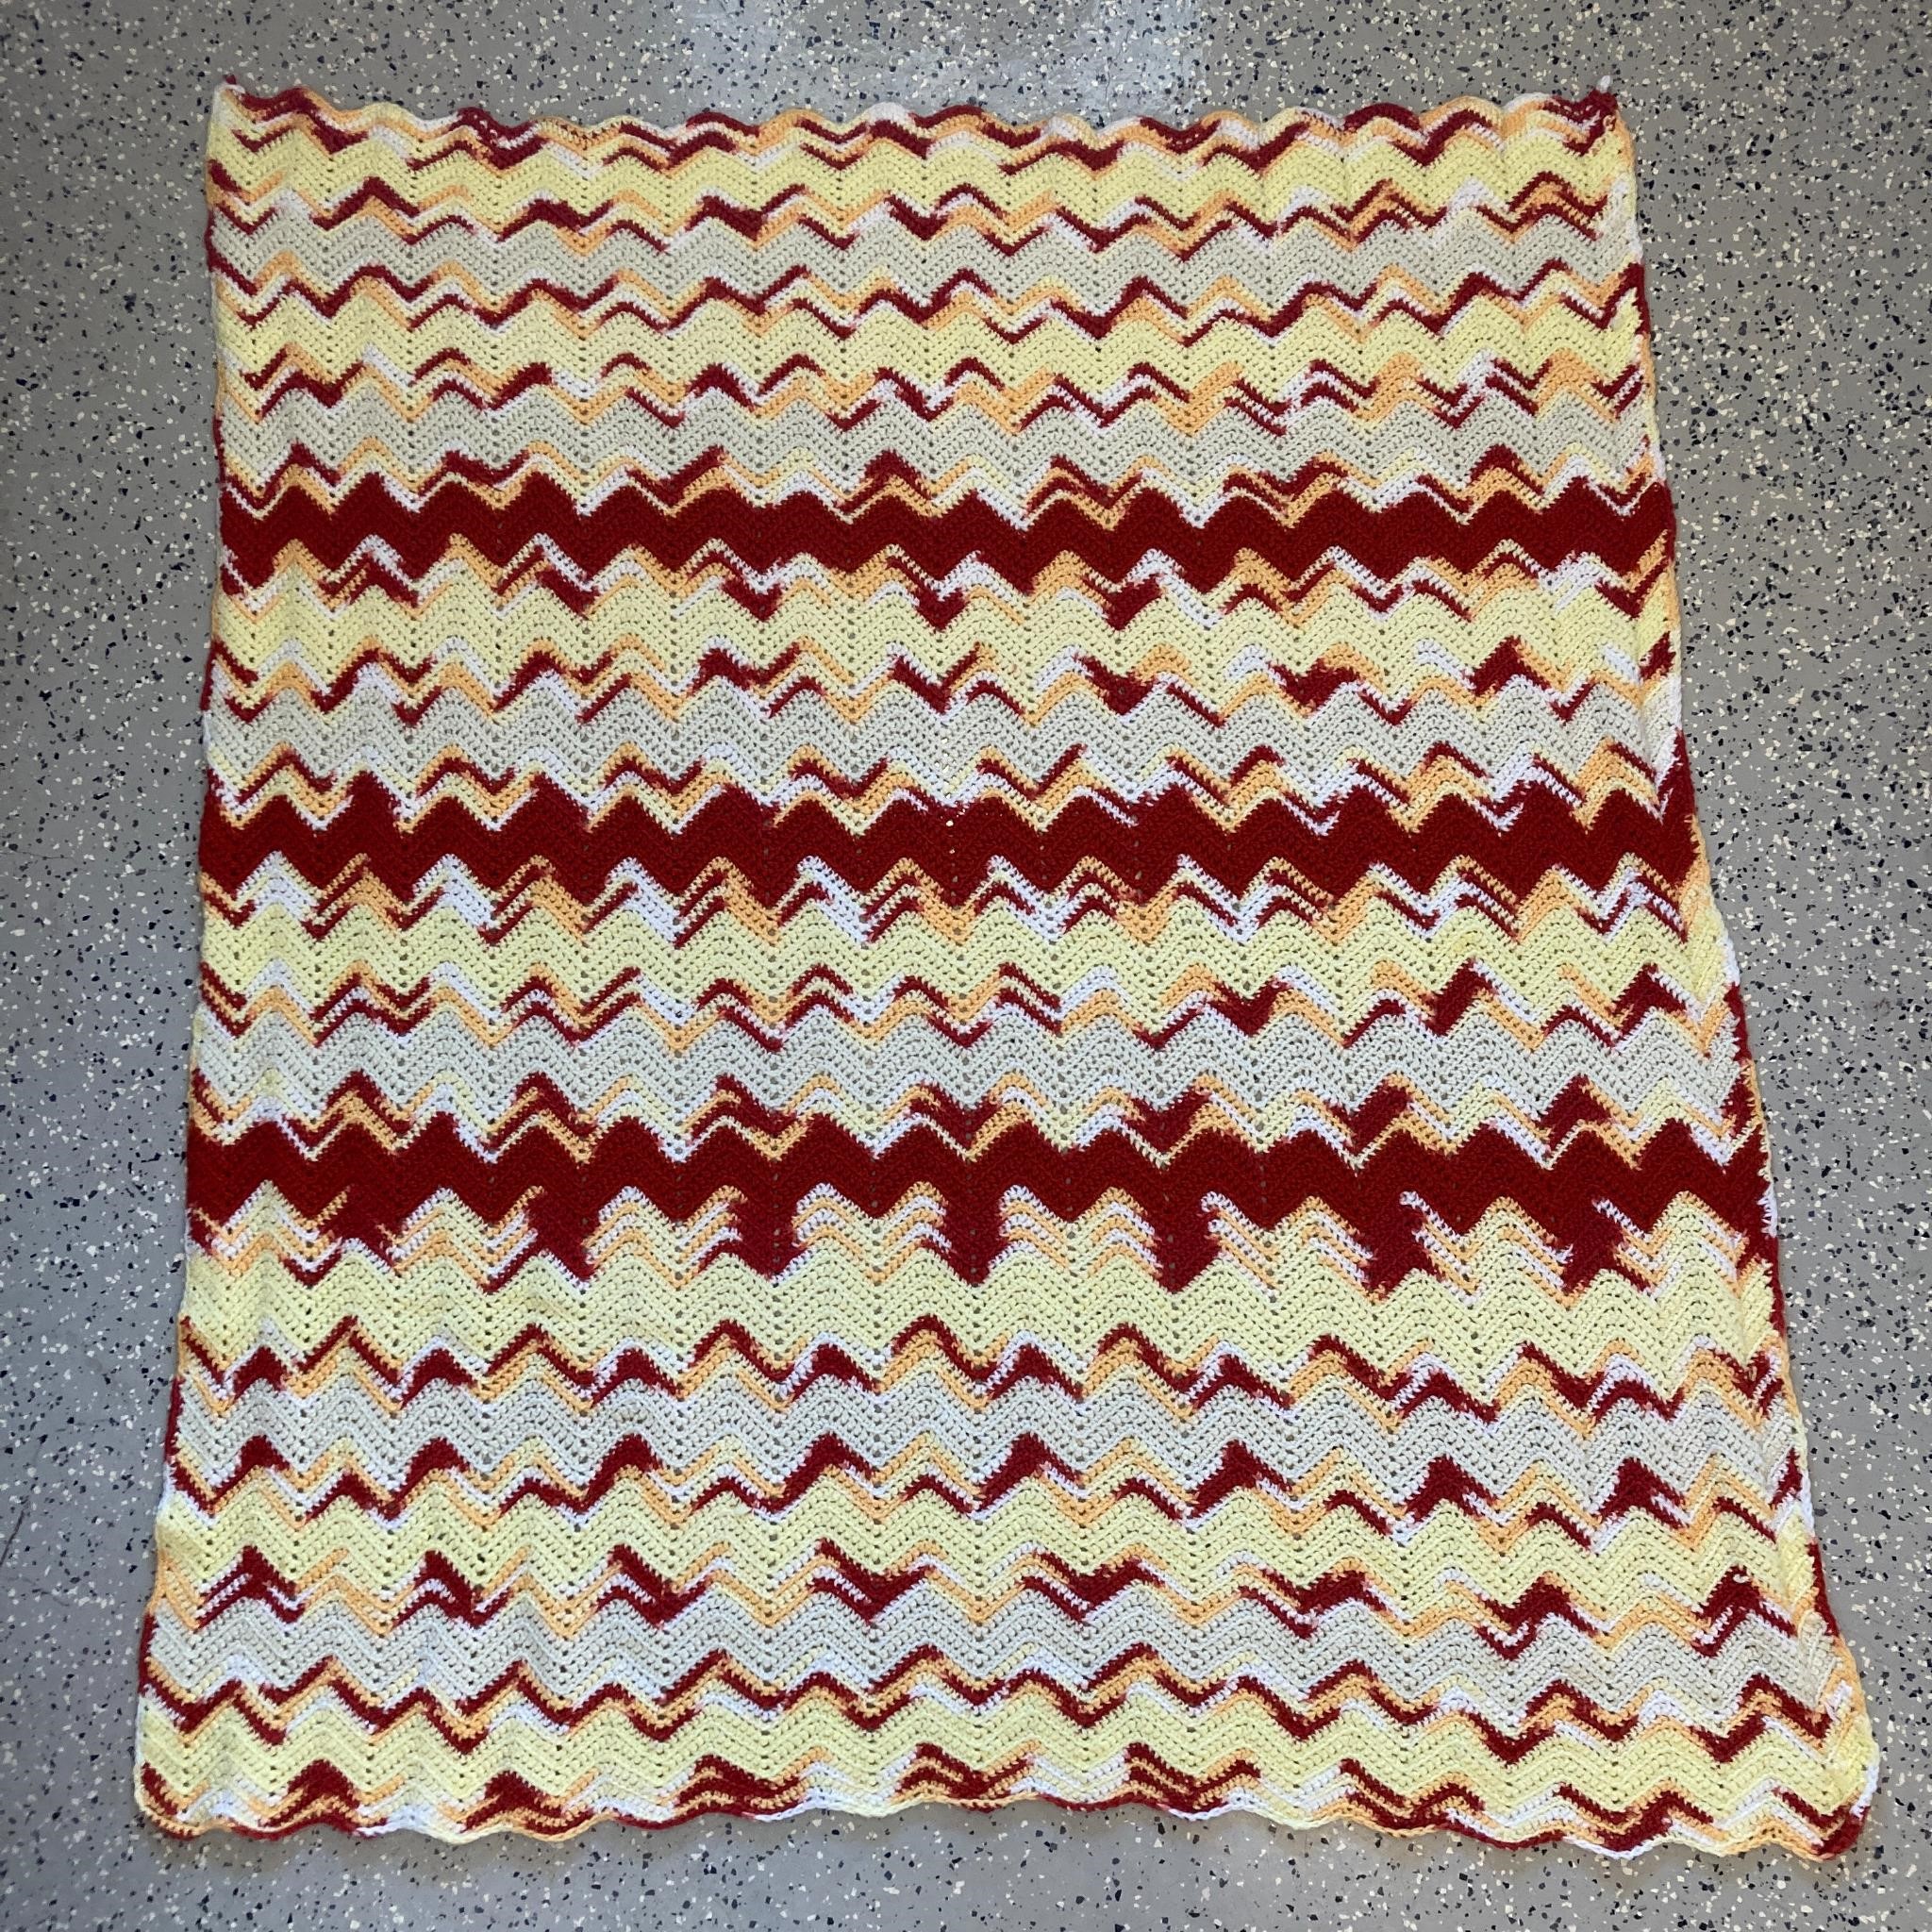 Vintage Crocheted Blanket in Retro Colours